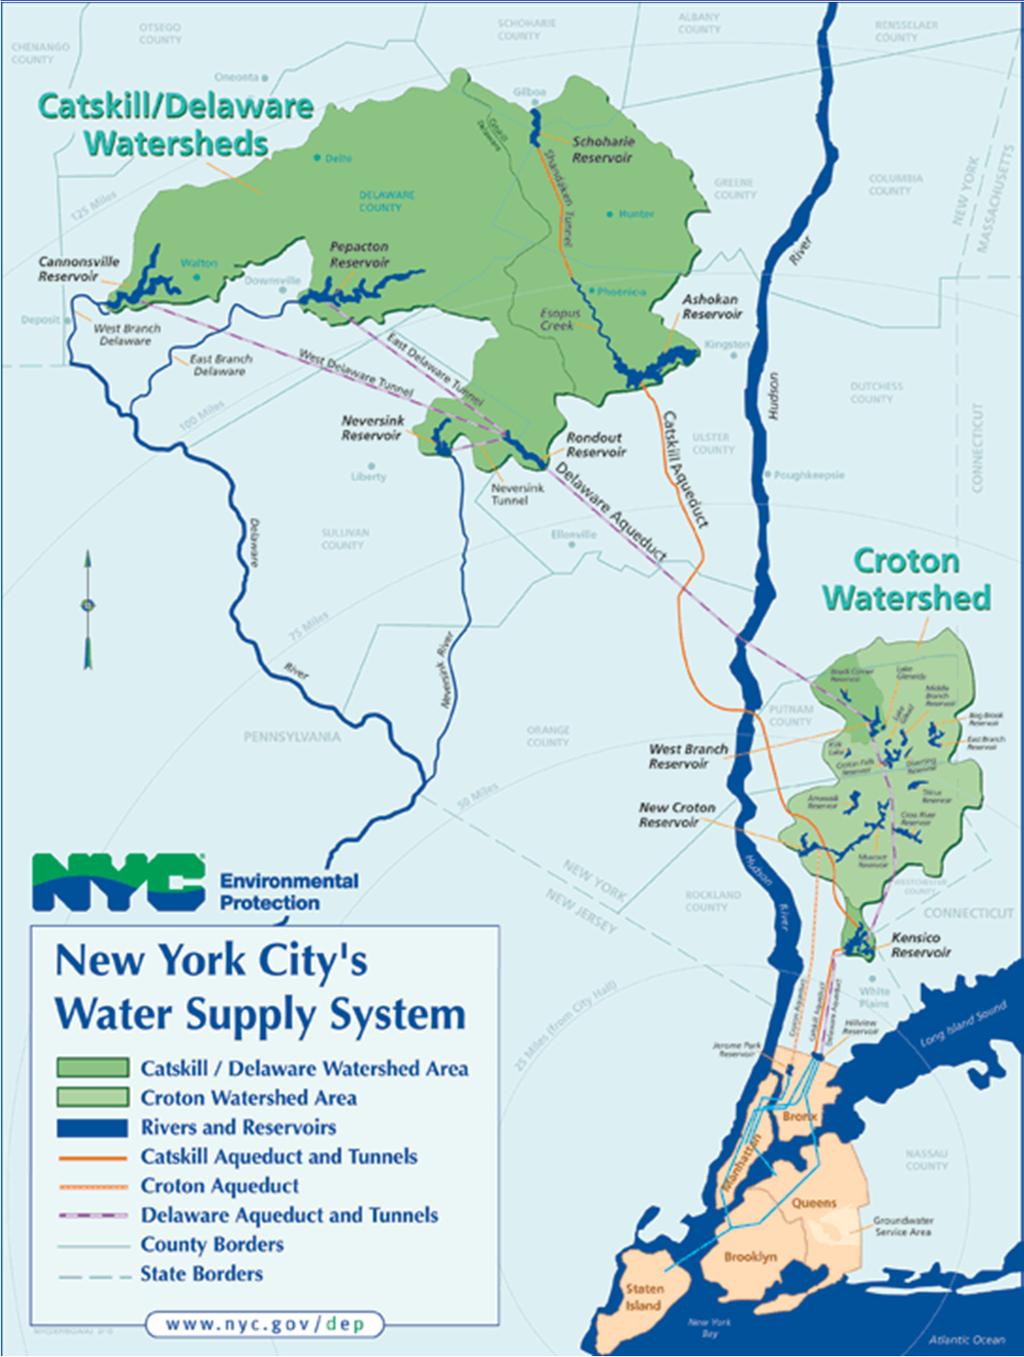 New York City Water Supply 3 systems Delaware, Catskill, and Croton 19 reservoirs & 3 controlled lakes 2,000 square mile watershed in parts of 8 upstate counties Serves